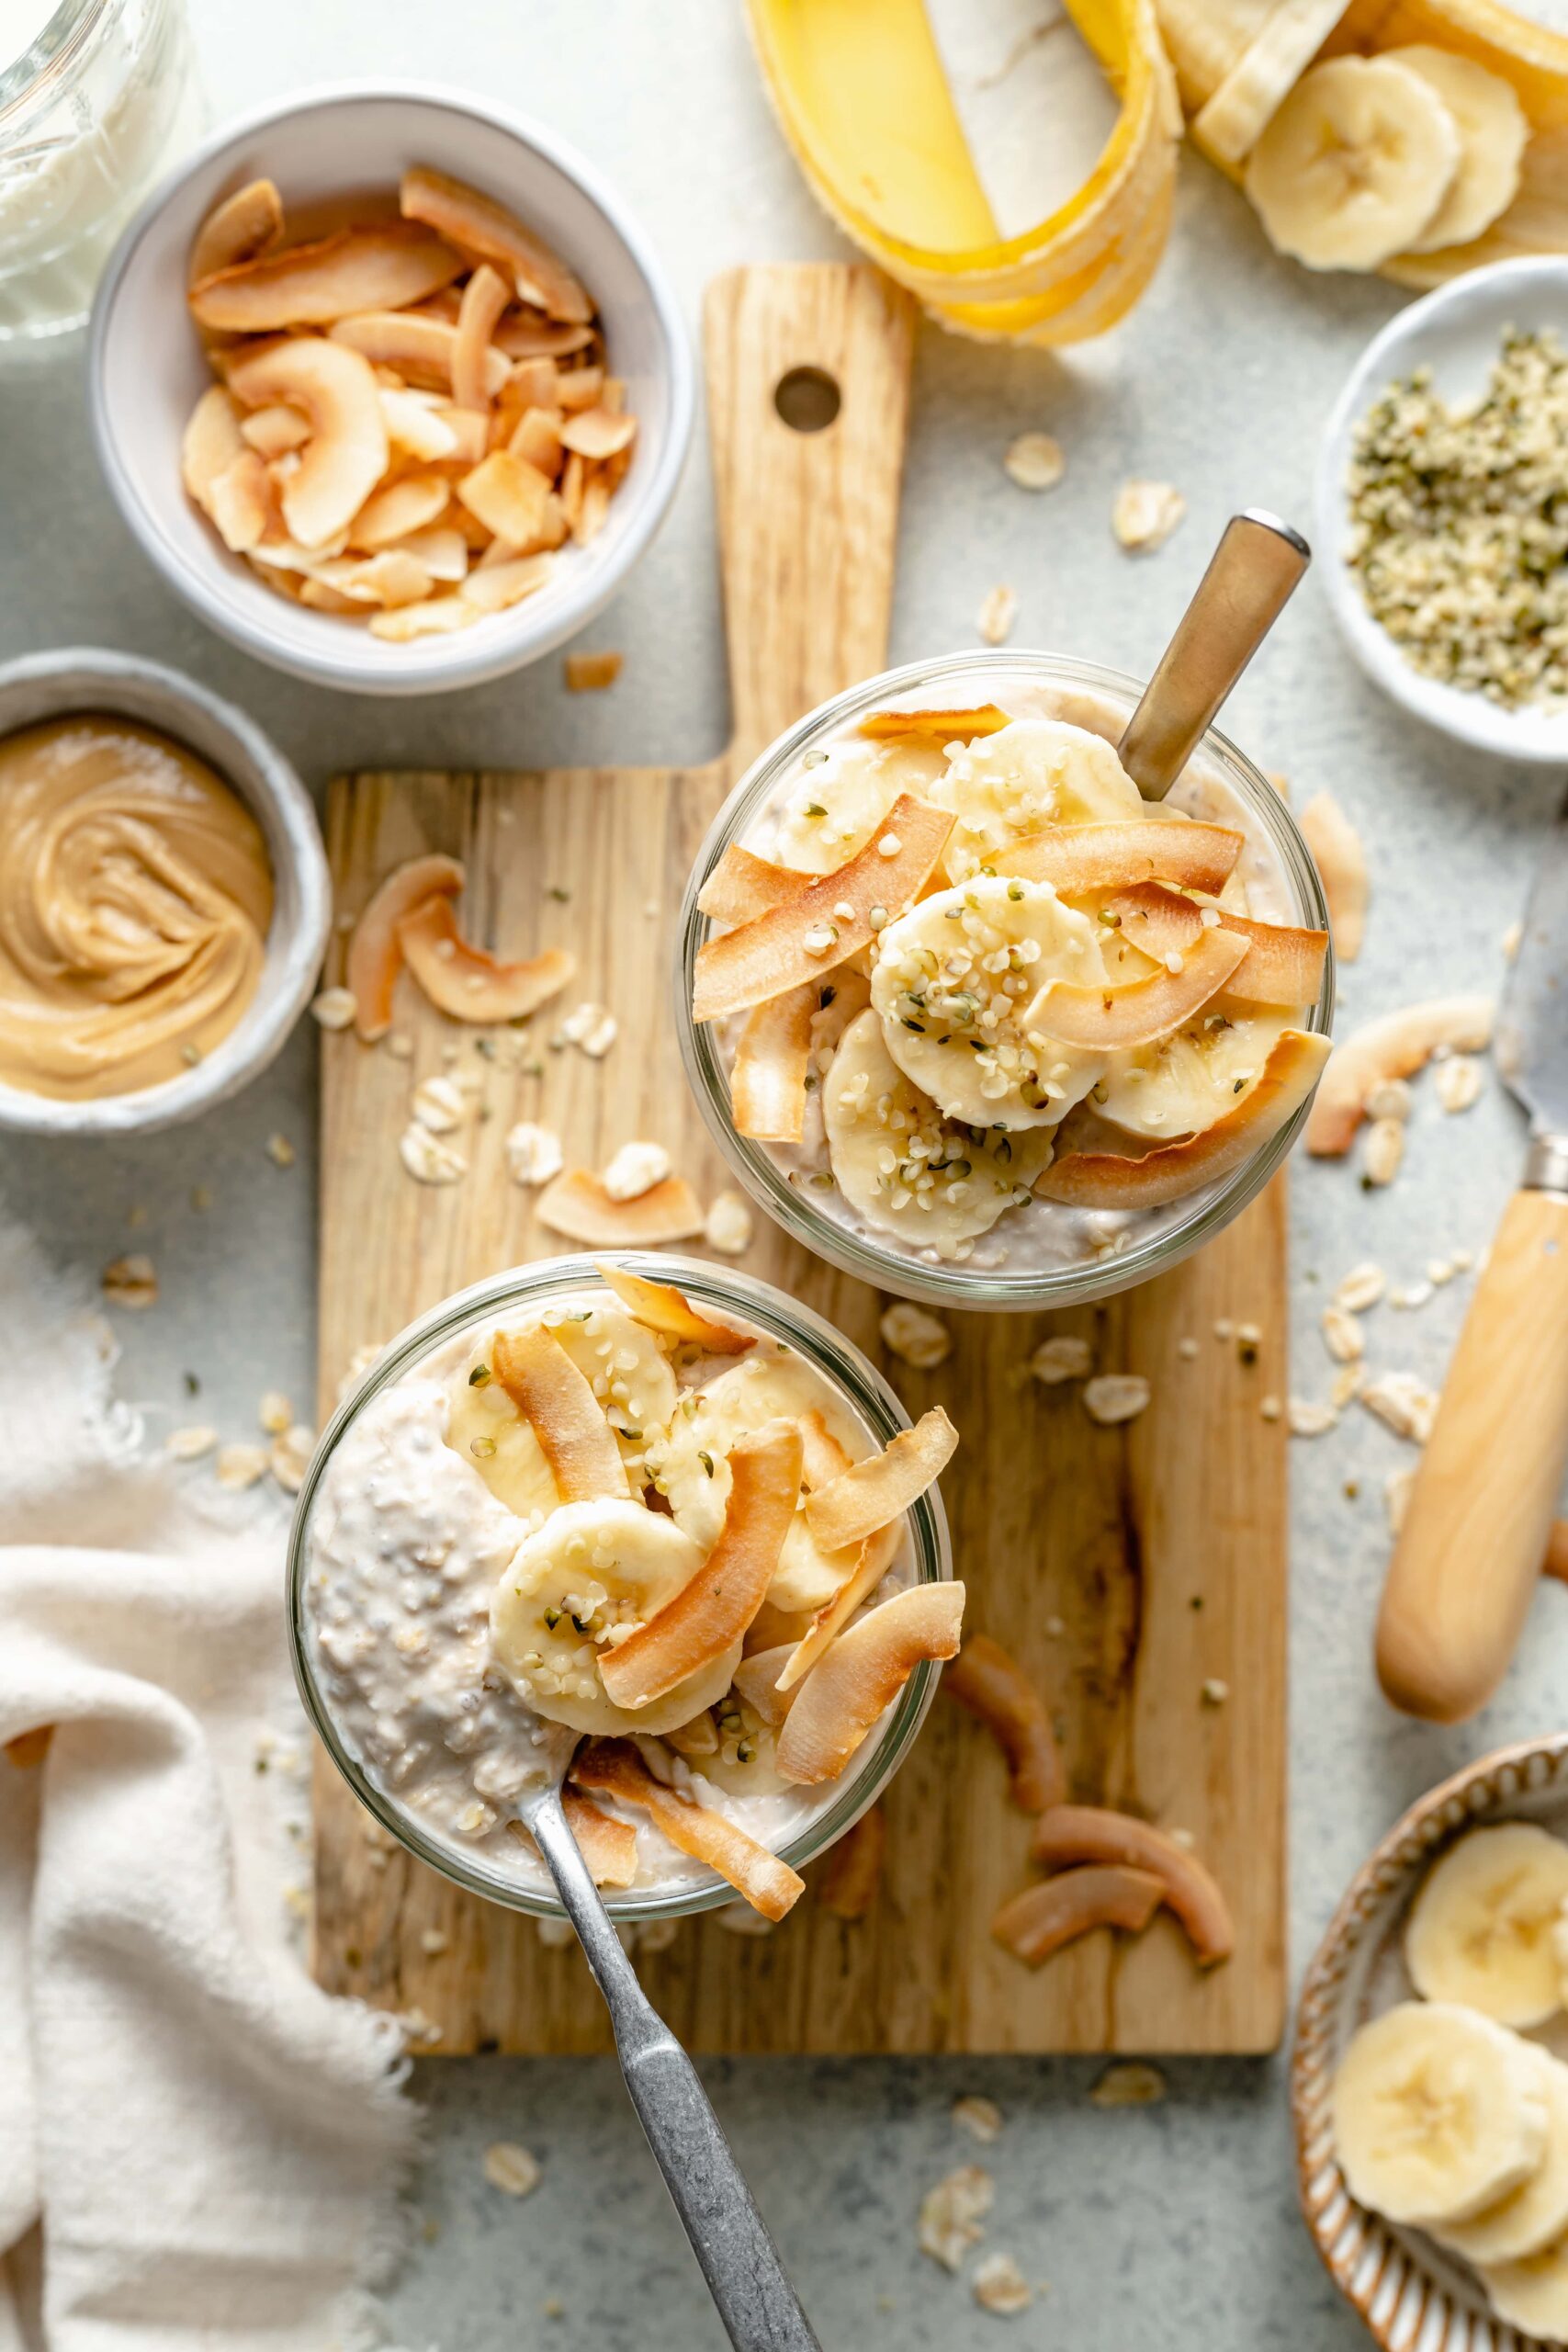 20 Healthy Overnight Oatmeal Recipes - Jeanette's Healthy Living